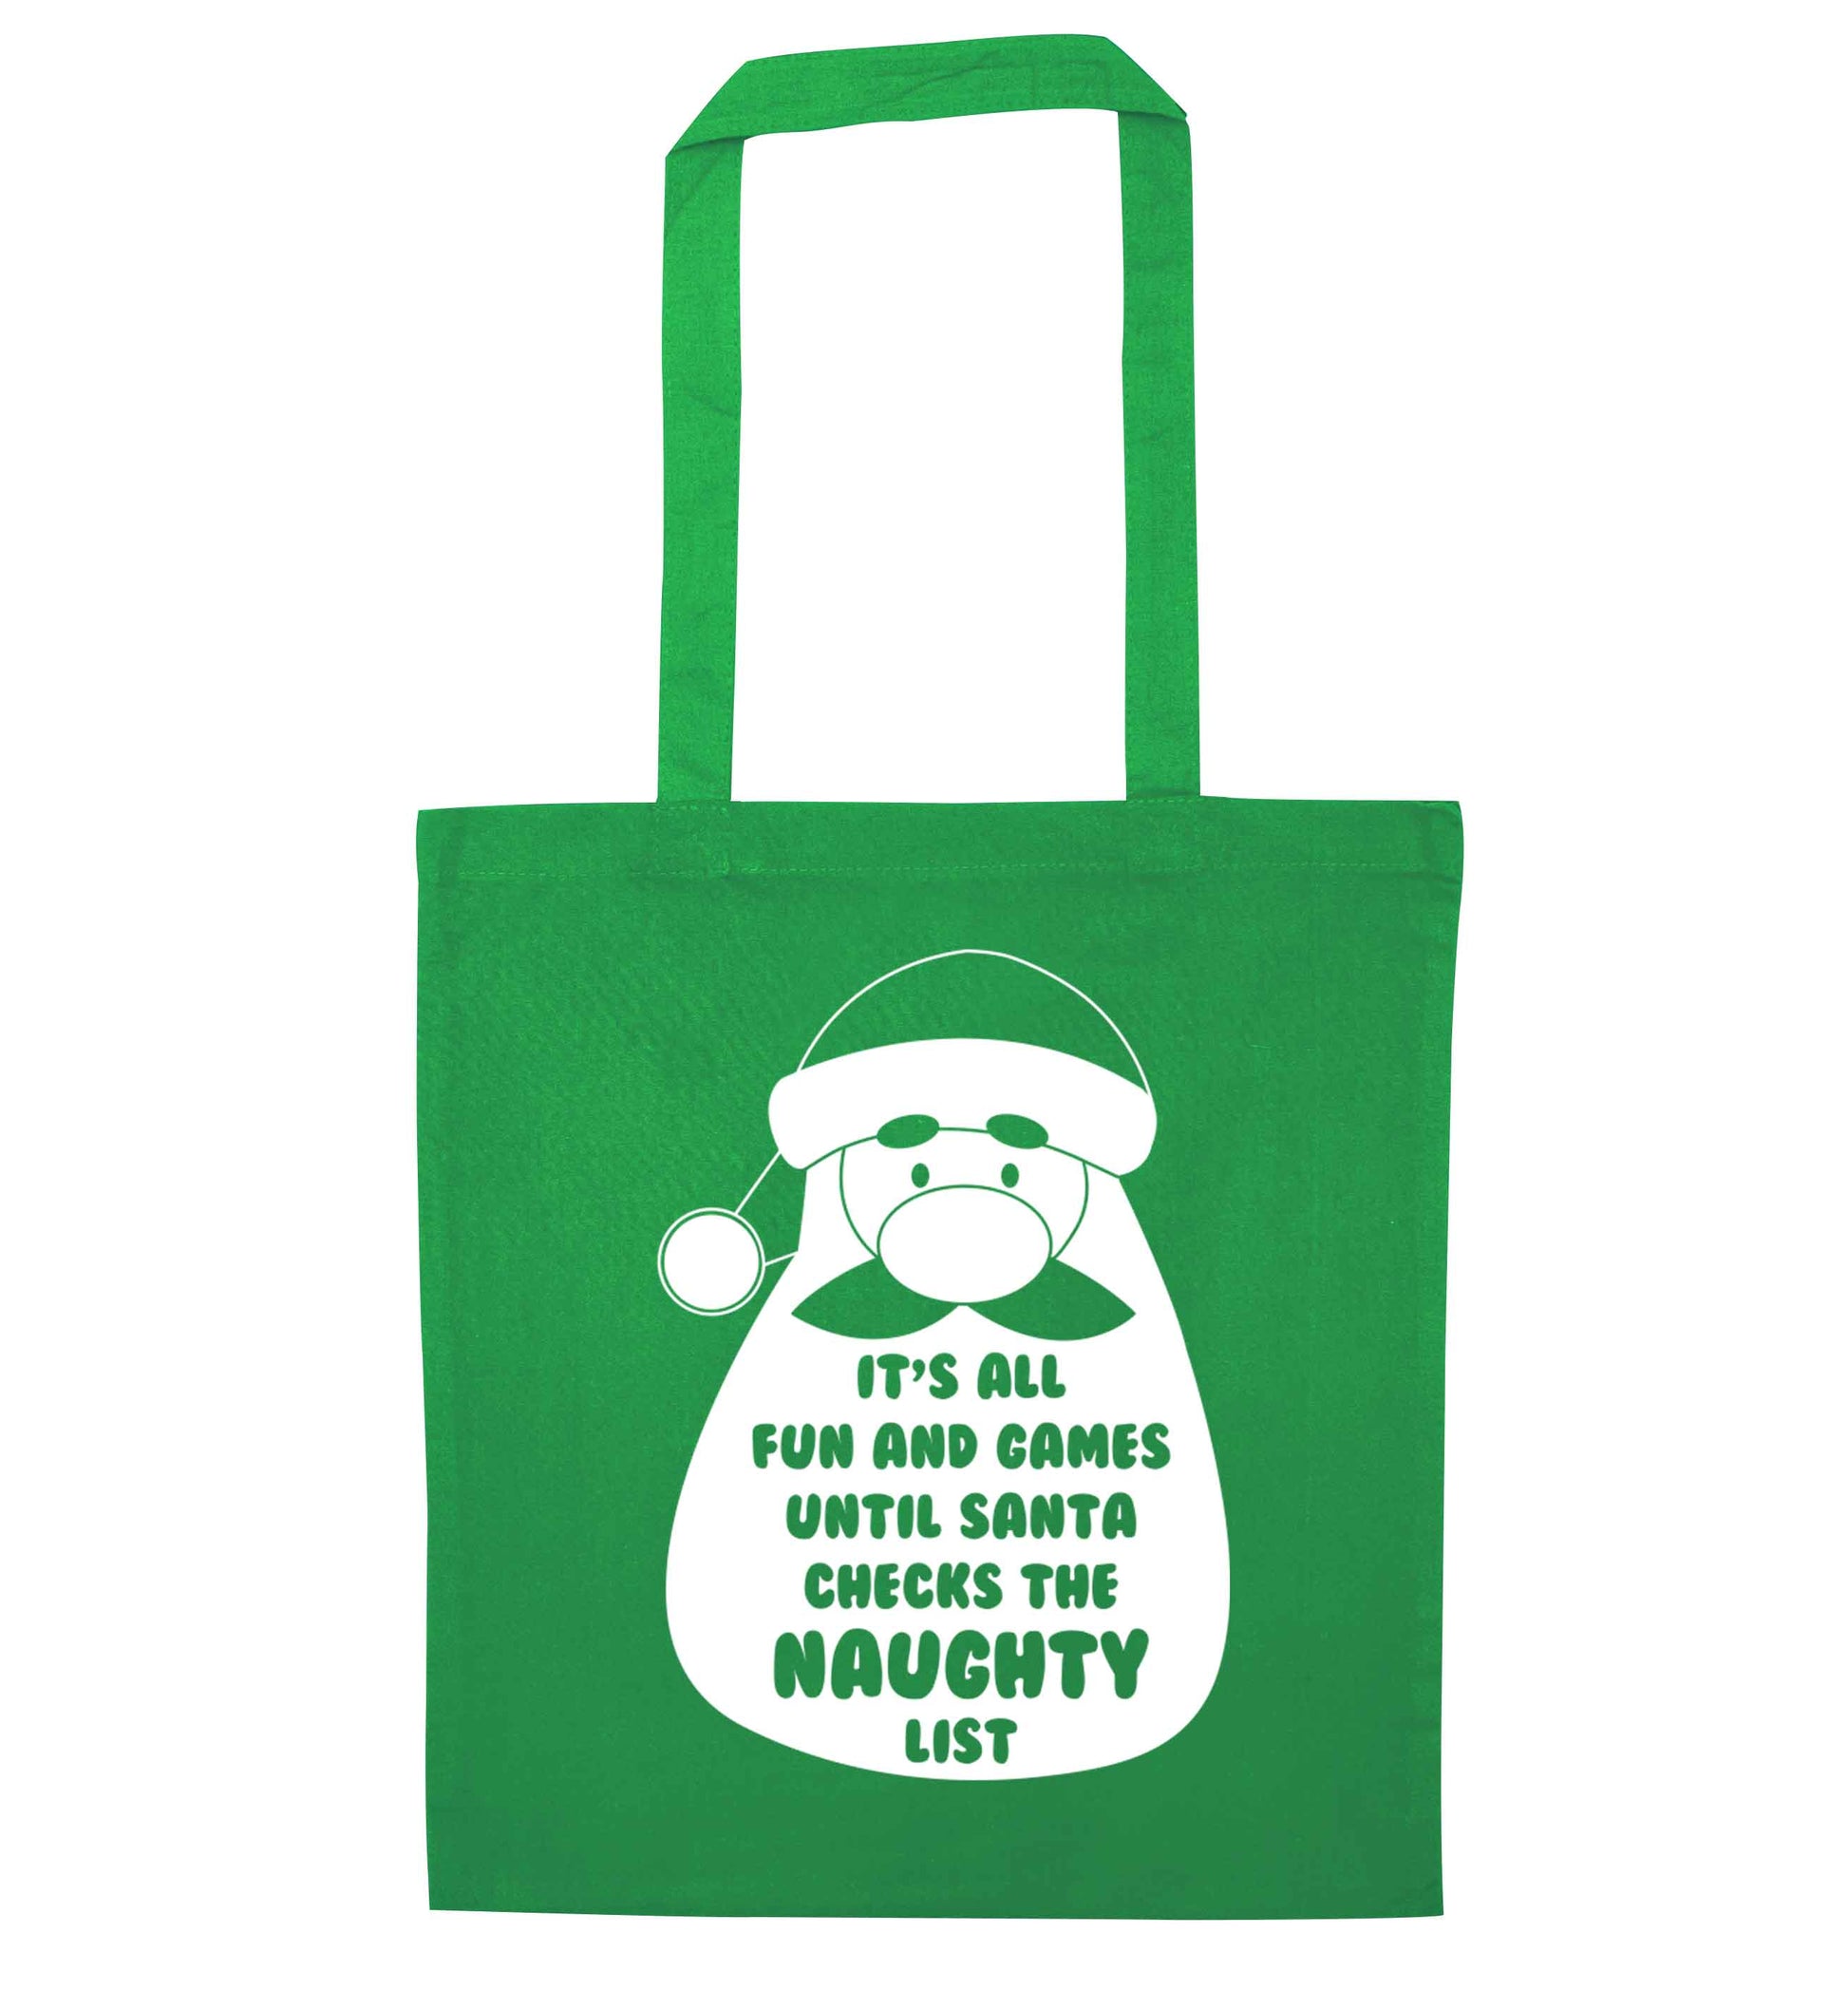 It's all fun and games until Santa checks the naughty list green tote bag